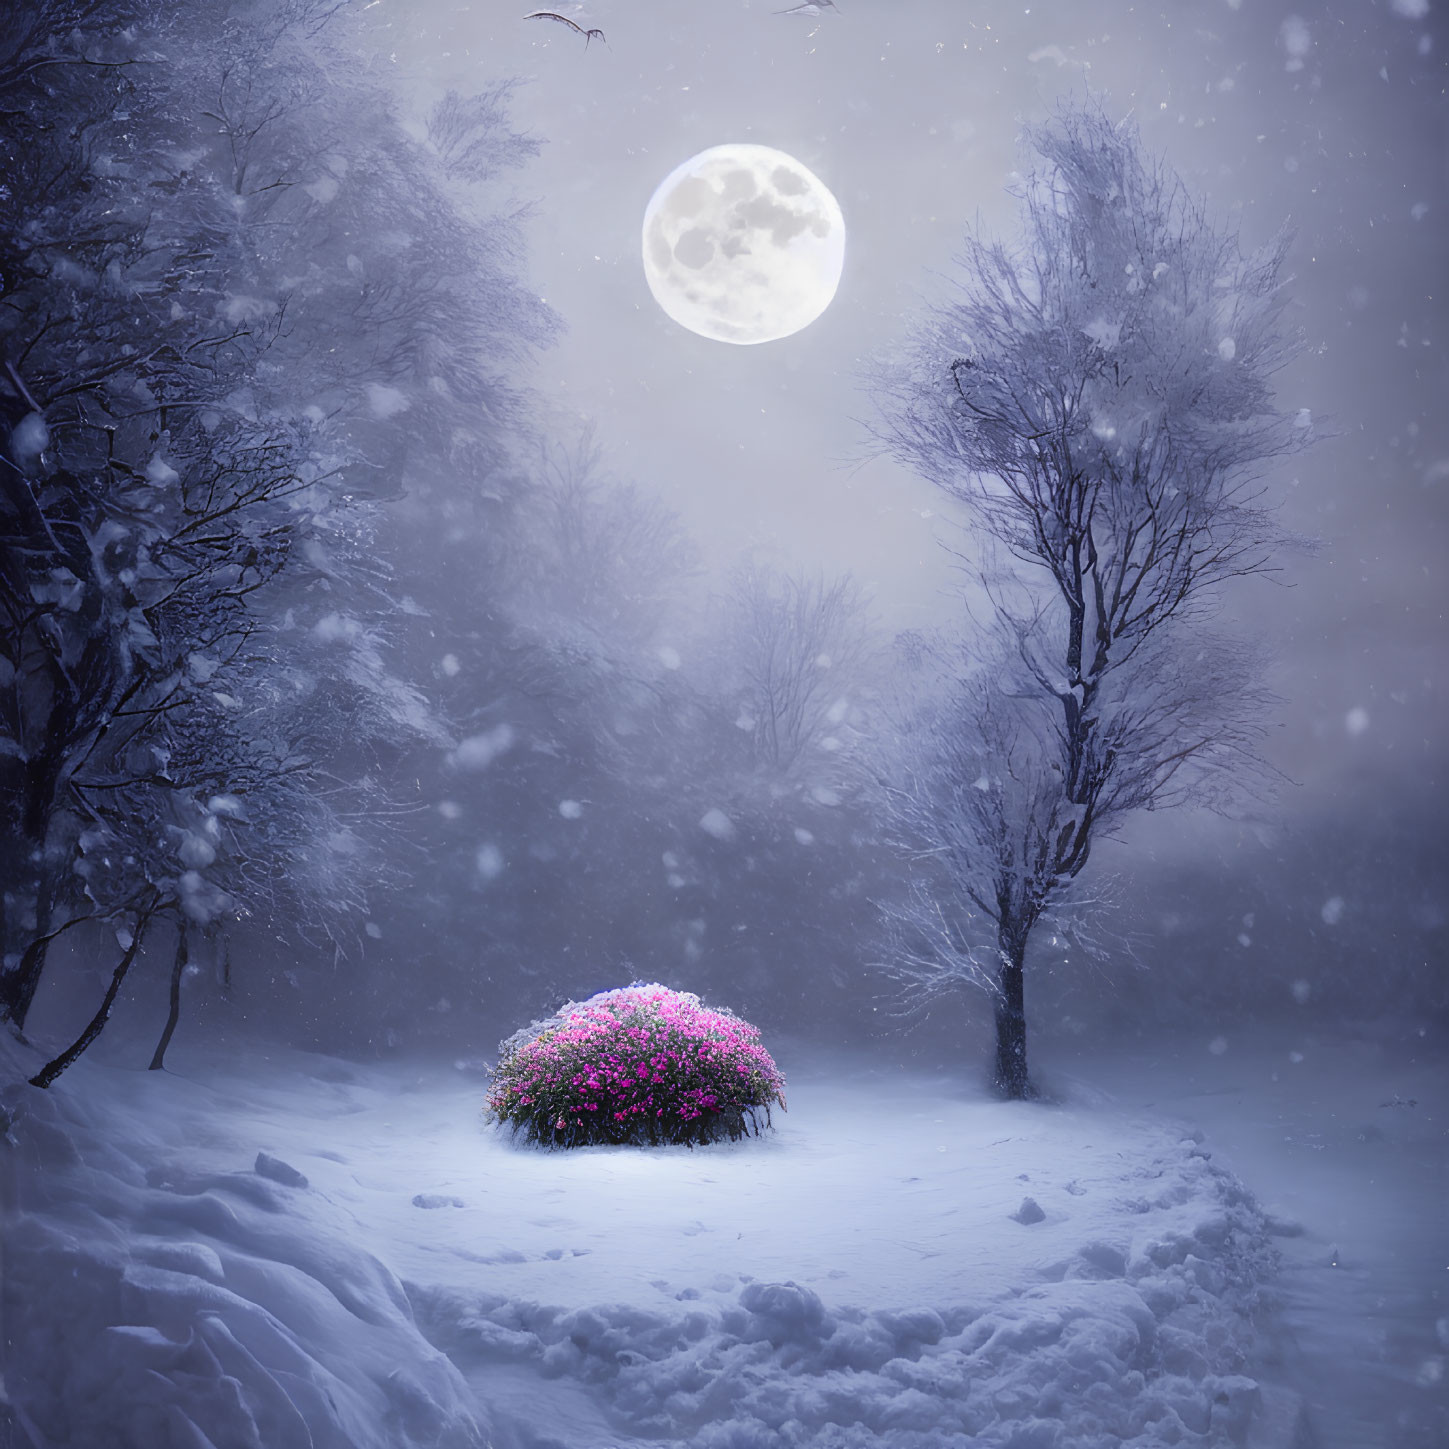 Snowy Night Landscape with Full Moon and Pink Flowers